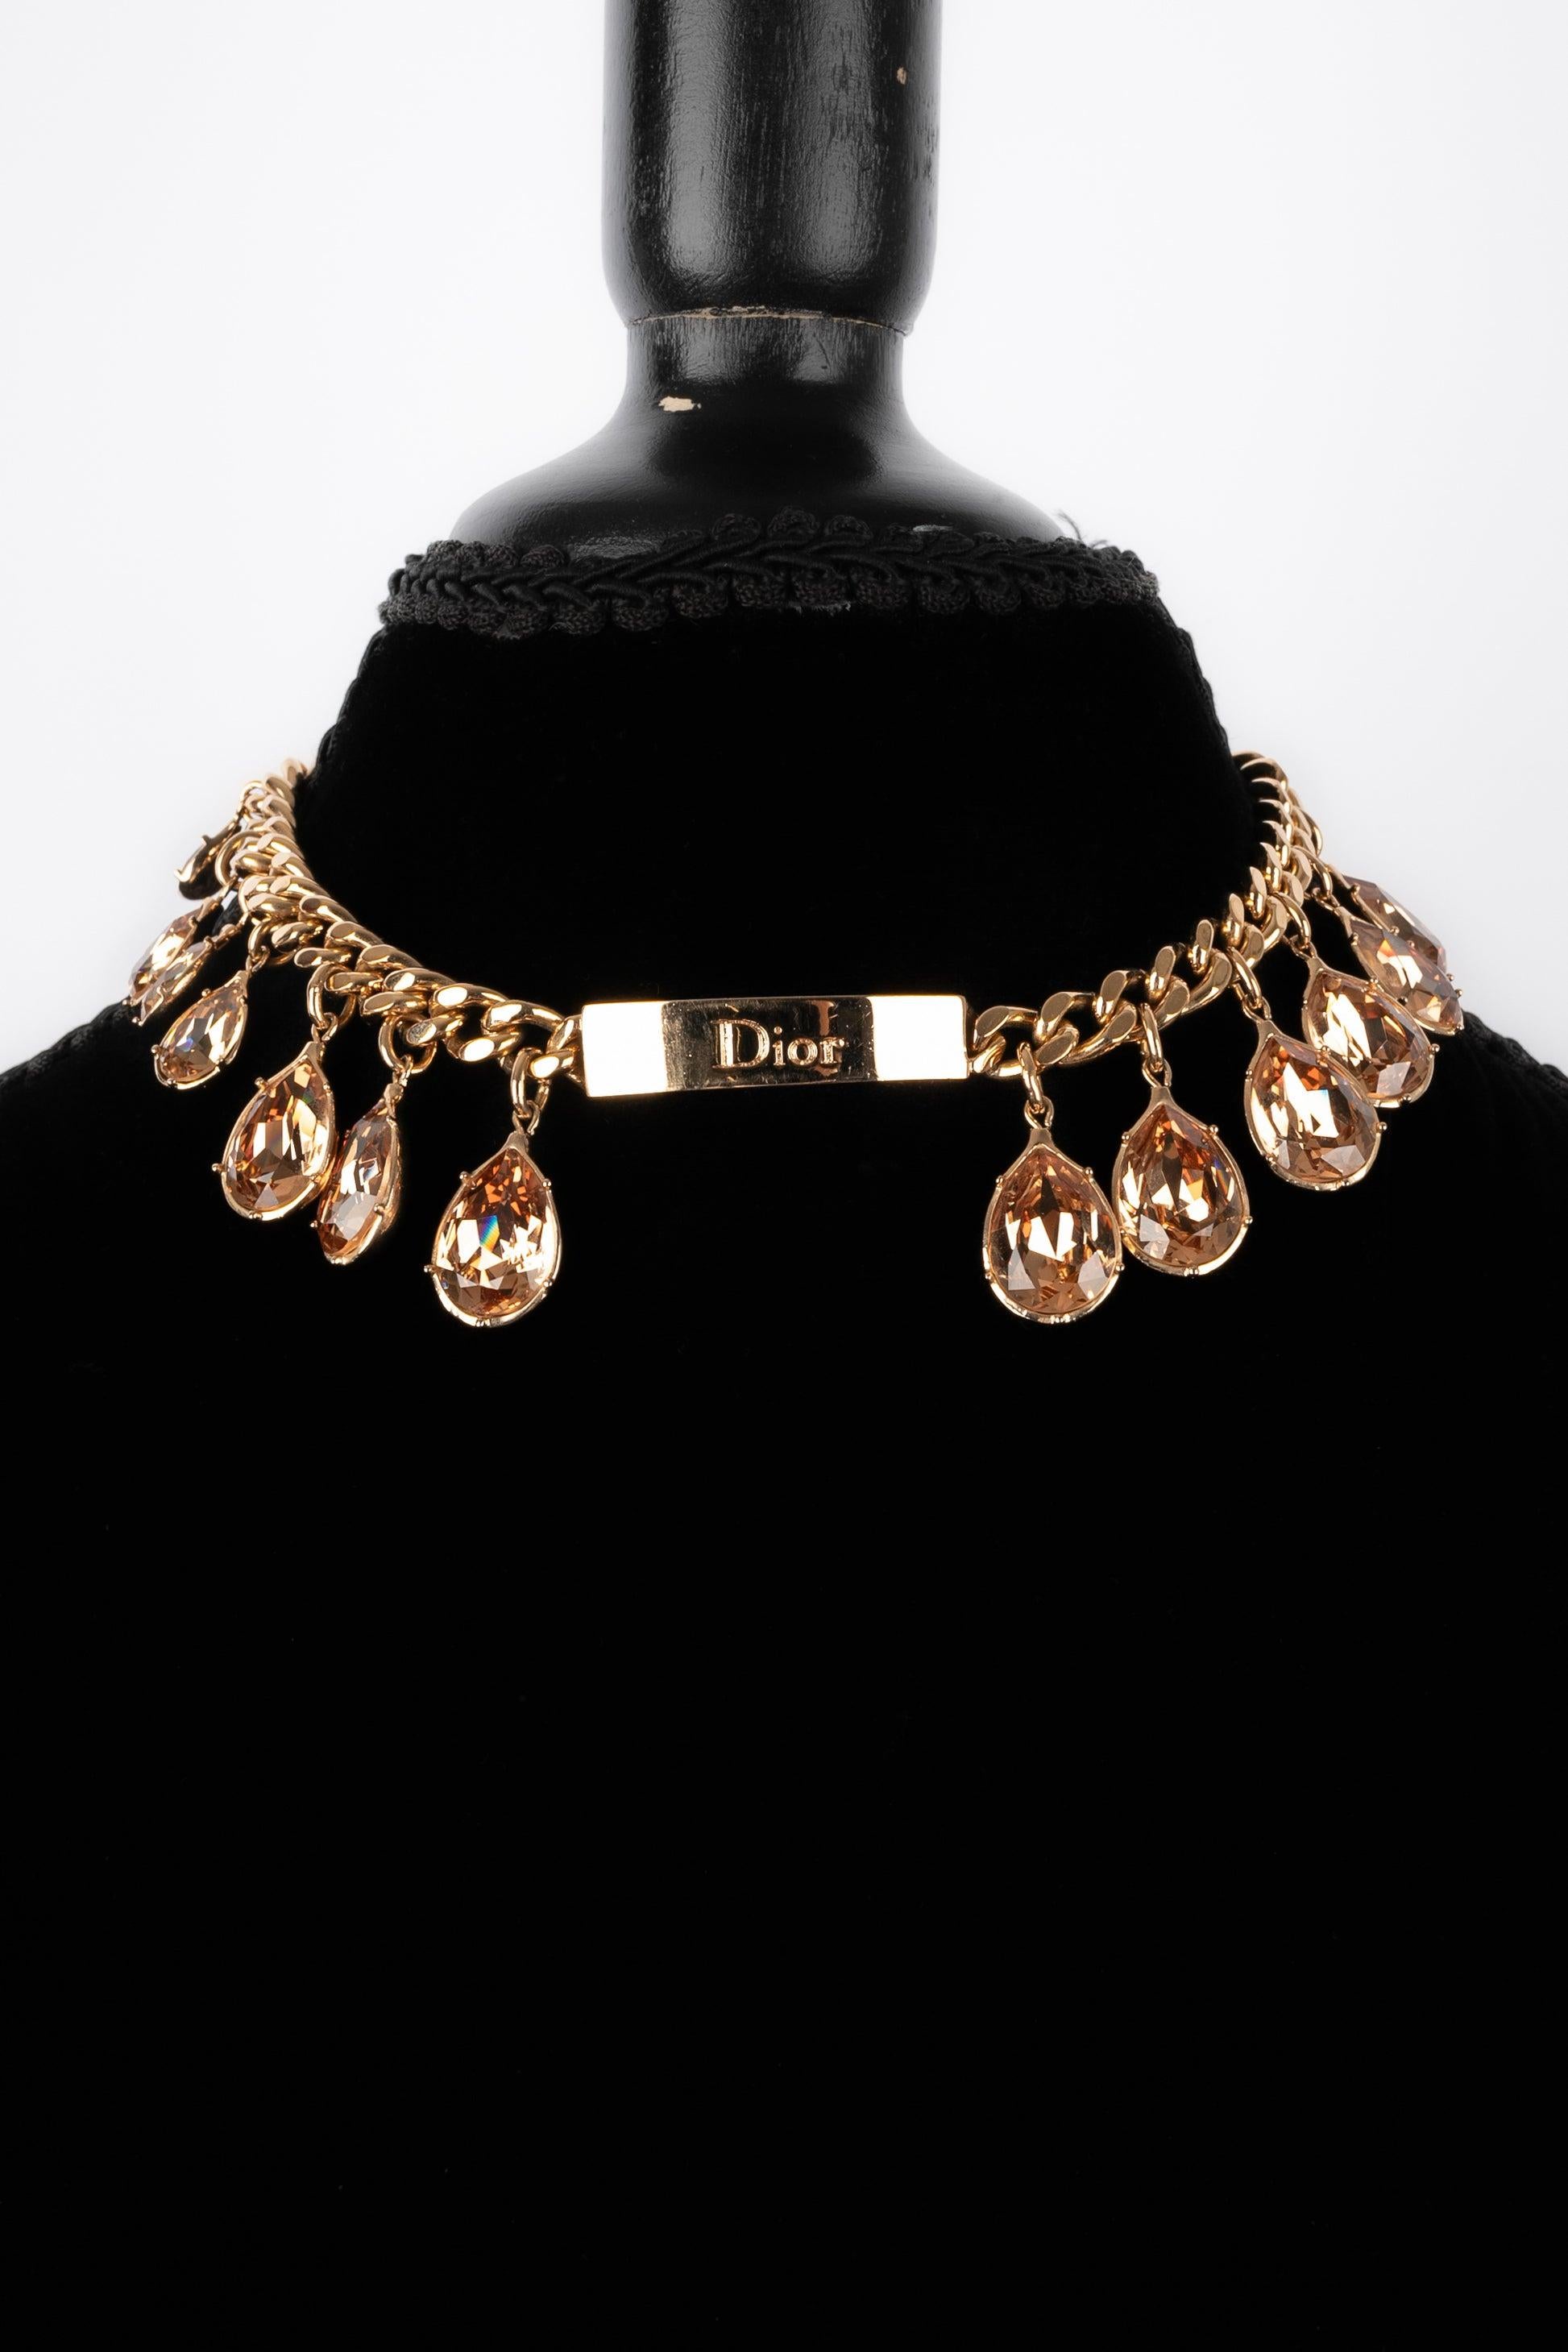 Christian Dior Necklace with Rhinestoned Charms, 2004 For Sale 1